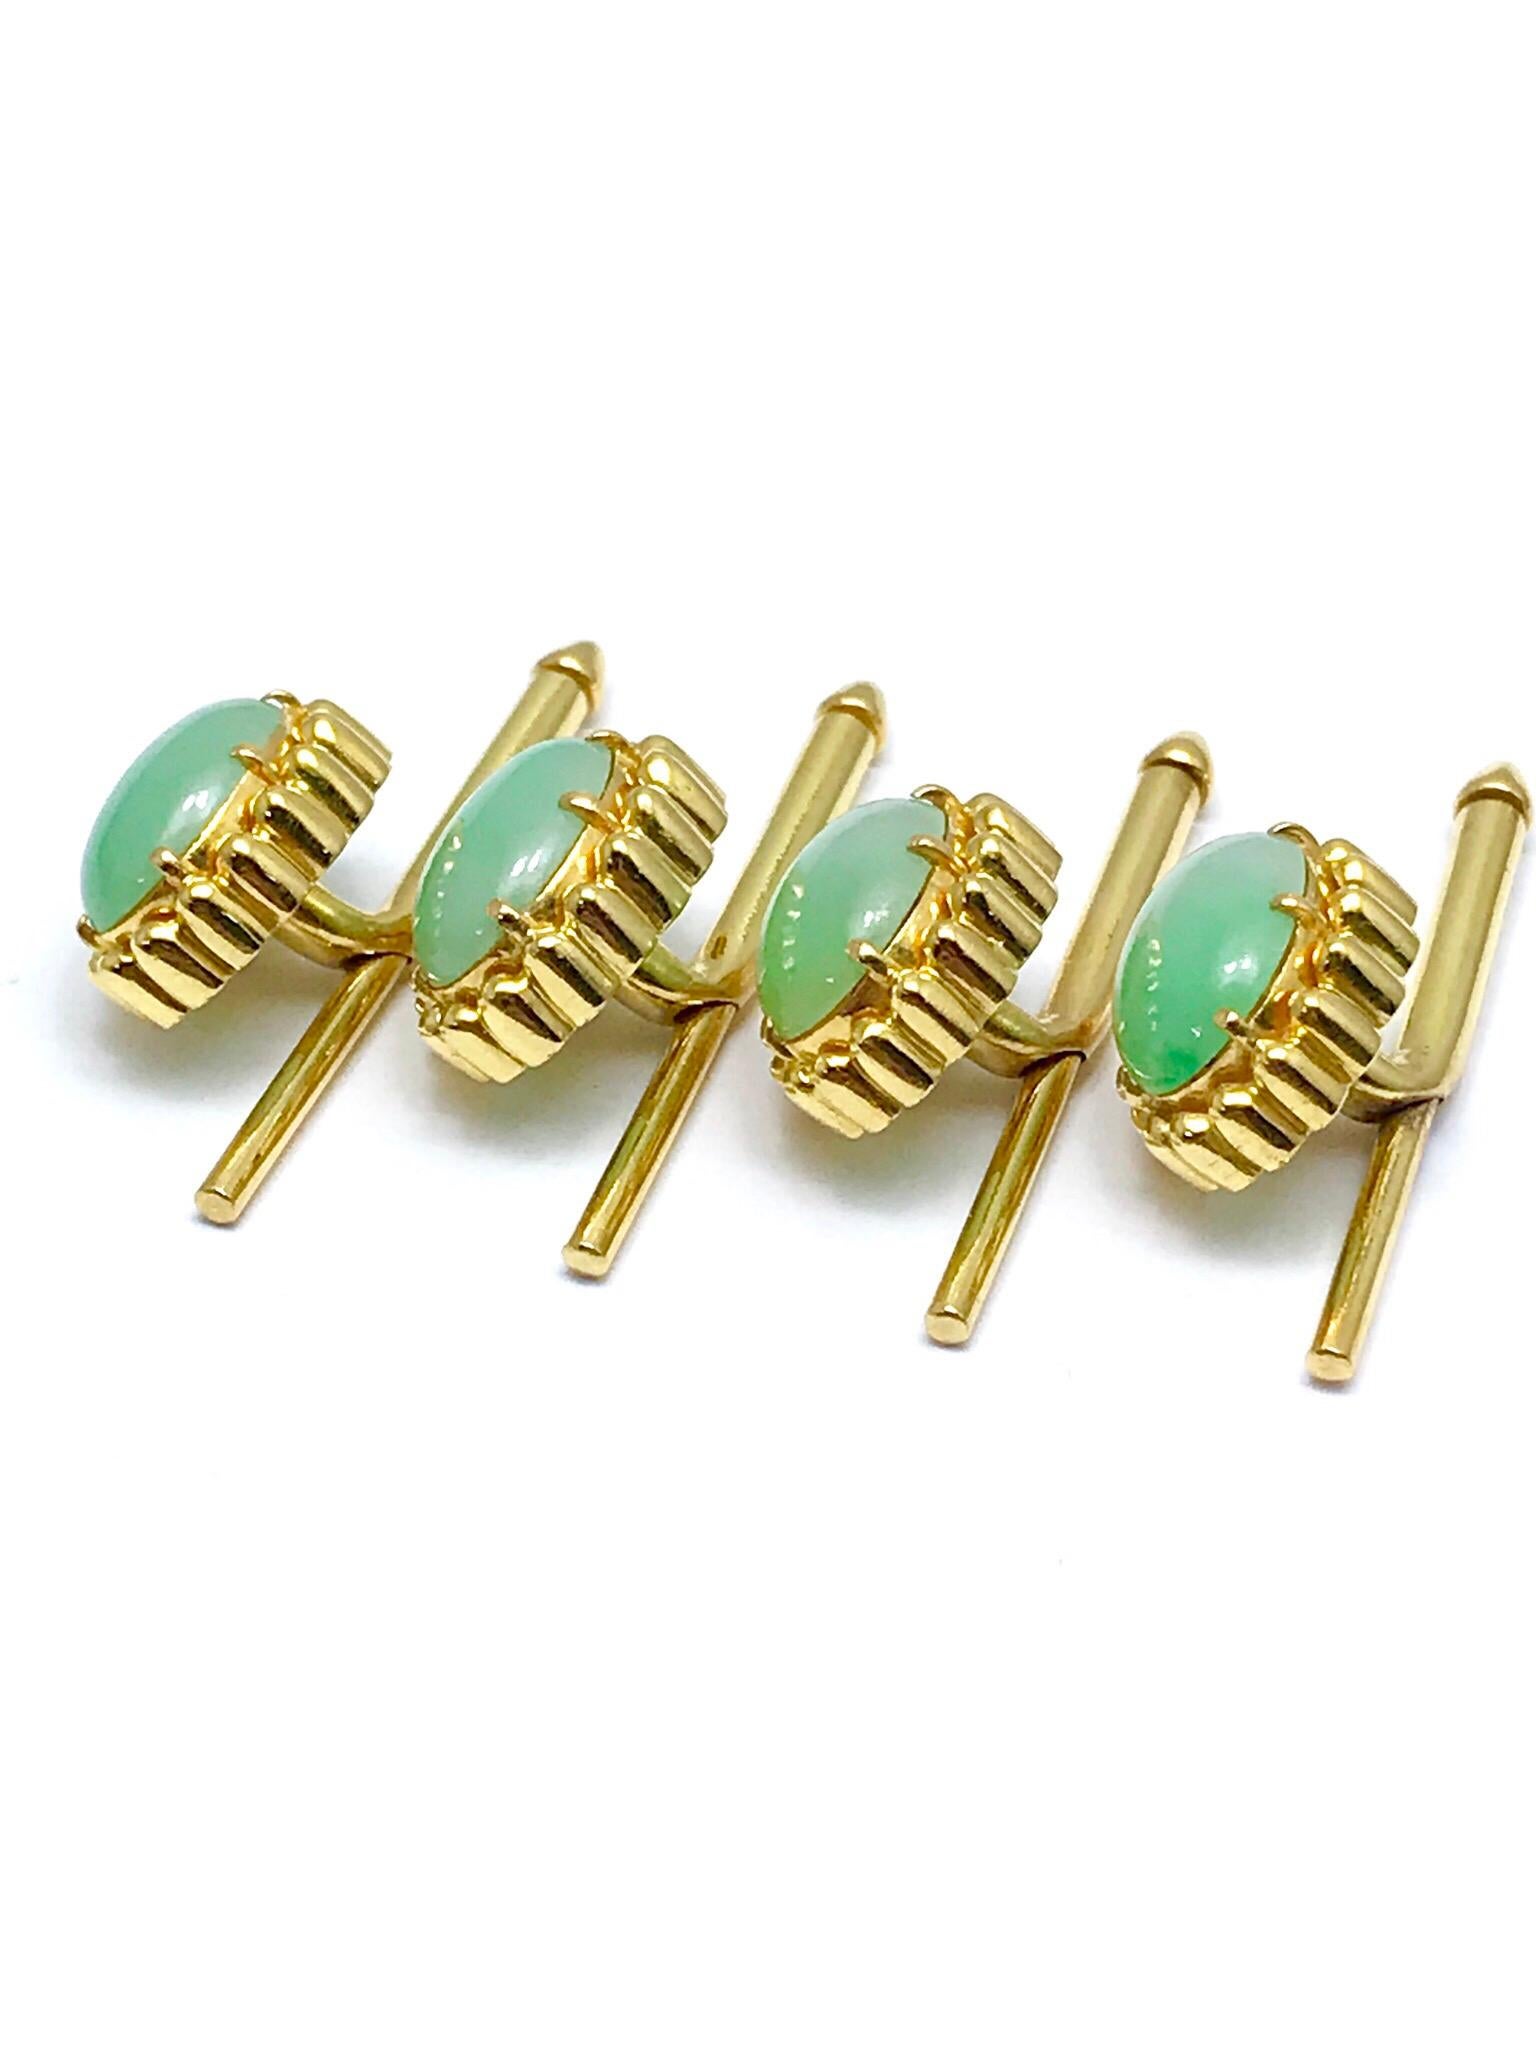 Oval Cut Oval Cabochon Jade and 18 Karat Yellow Gold Stud Set For Sale